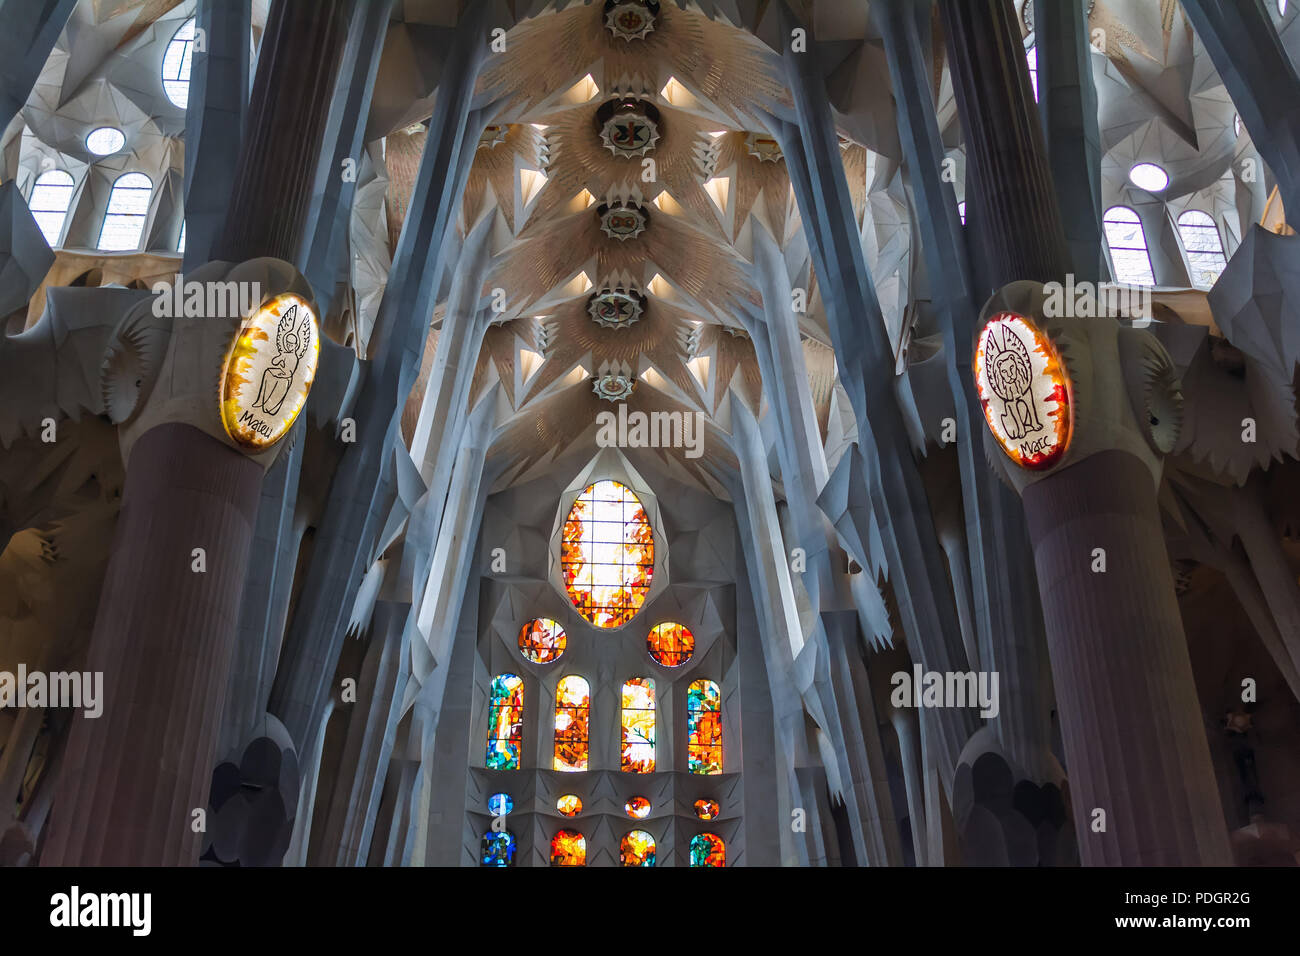 Architectural details of colorful stained glass window, ceiling and lights on columns inside Sagrada Familia - large unfinished Roman Catholic church  Stock Photo